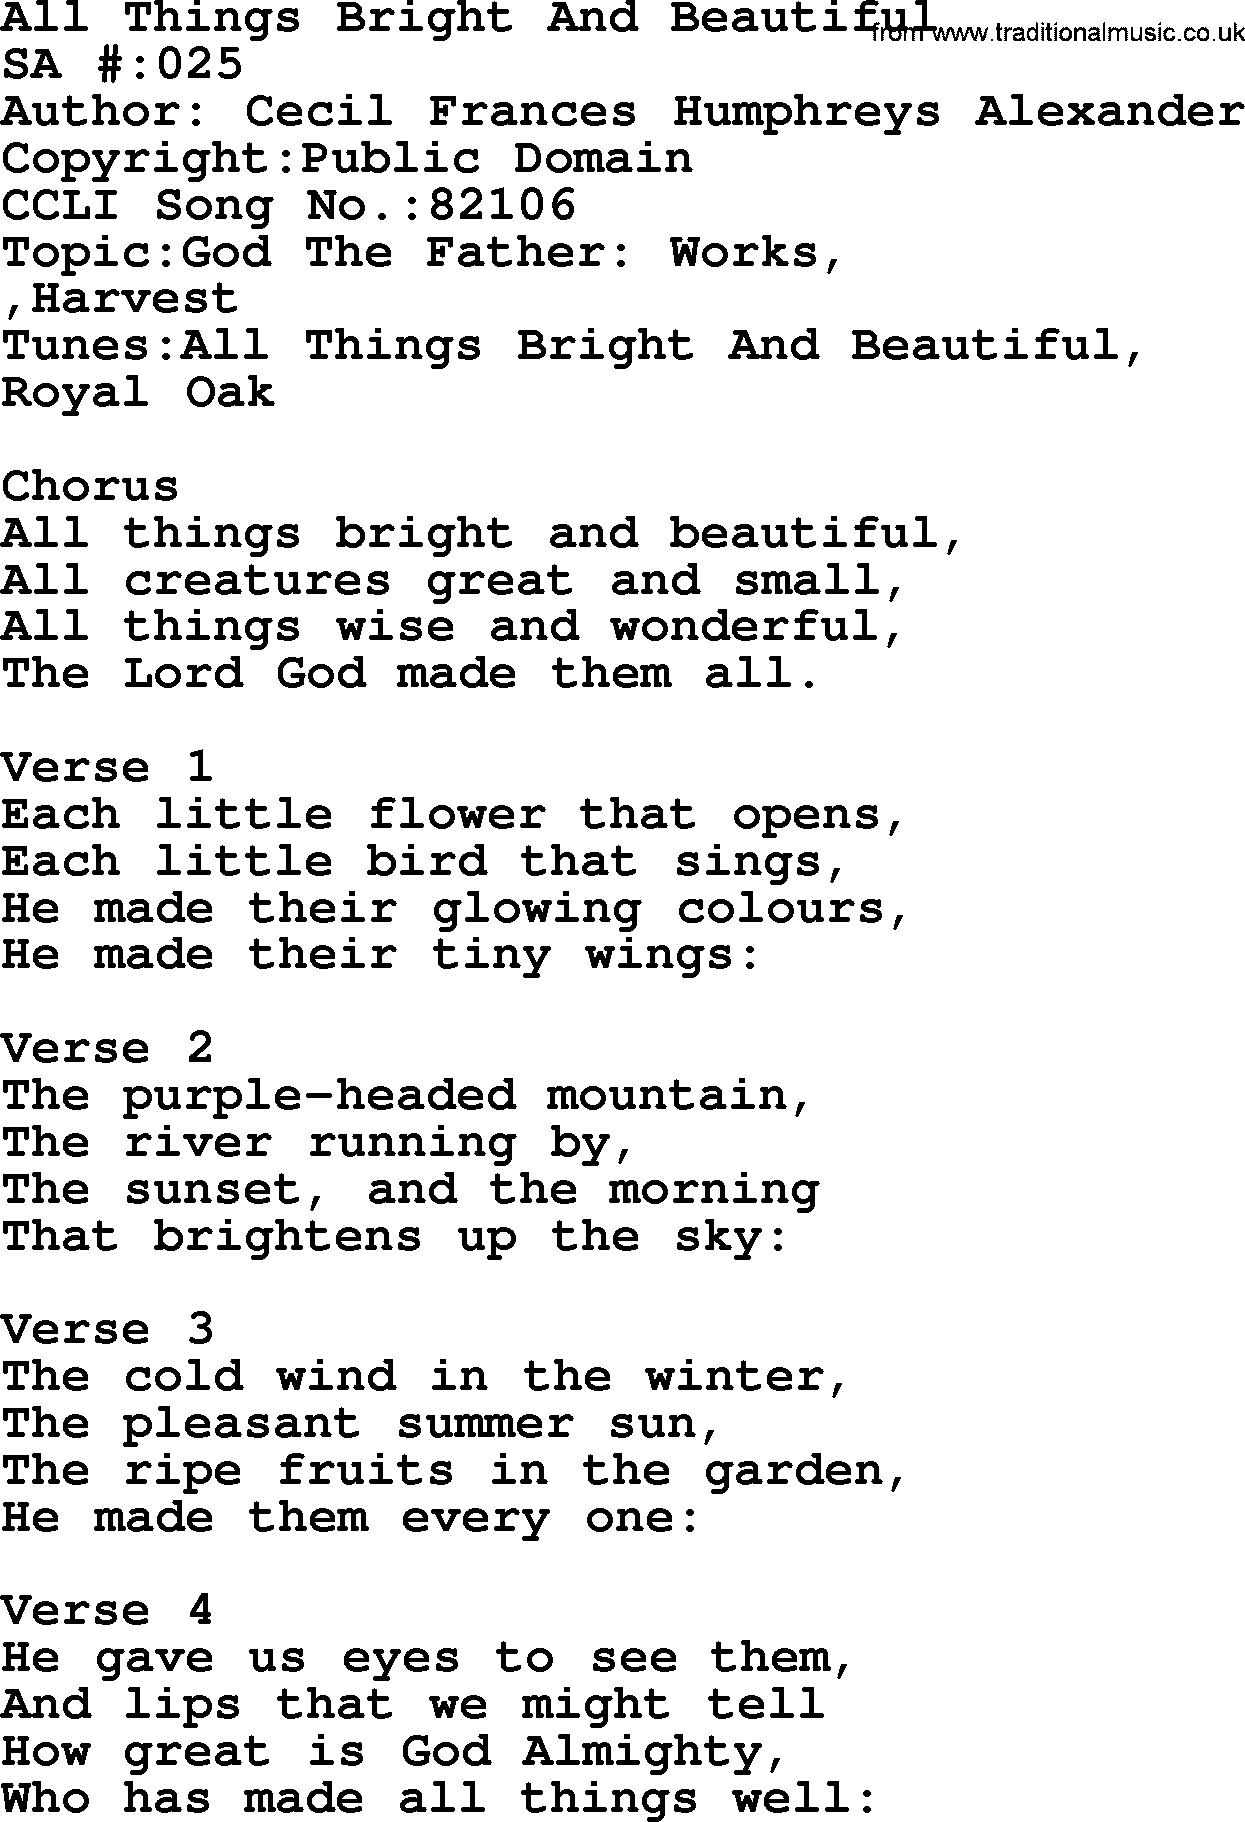 Salvation Army Hymnal, title: All Things Bright And Beautiful, with lyrics and PDF,